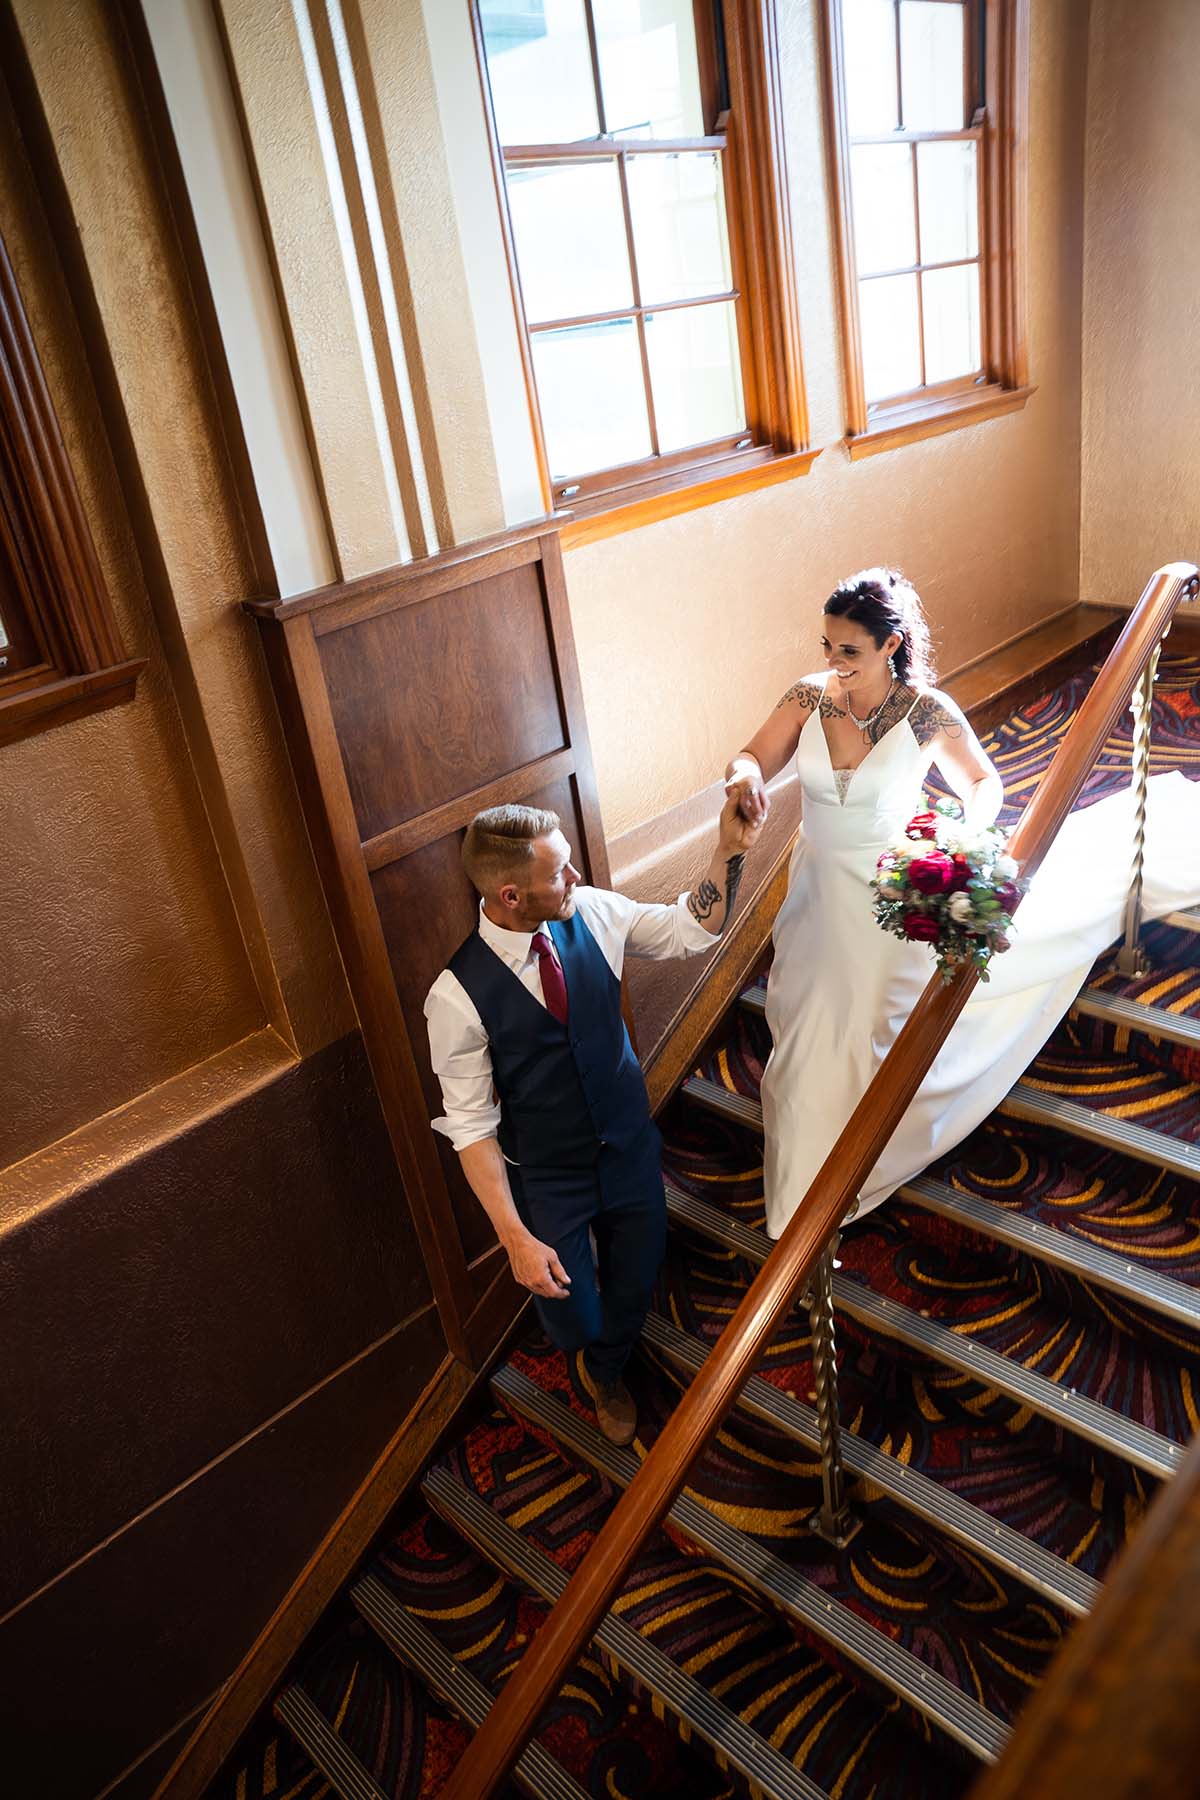 Wedding Photography - Groom escorting bride down grand stairs